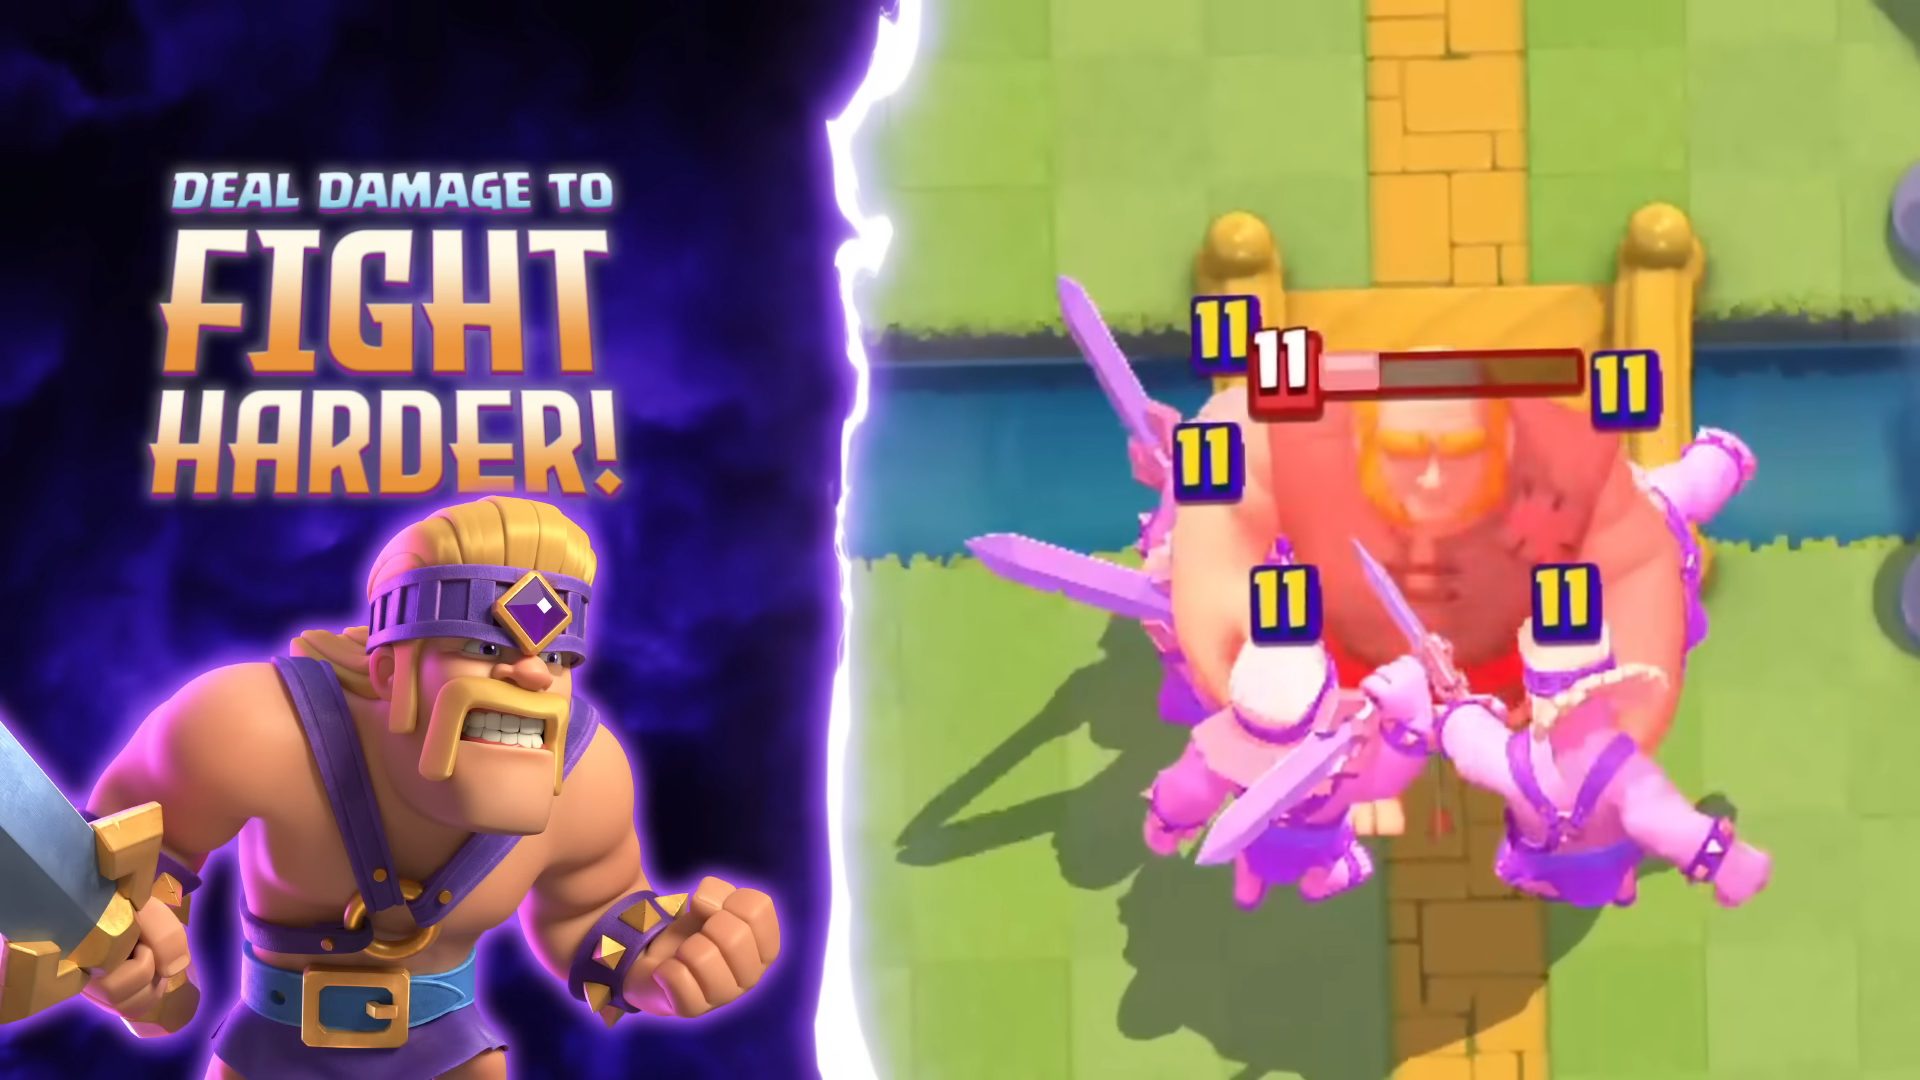 Key art with text saying "Fight harder" in Clash Royale